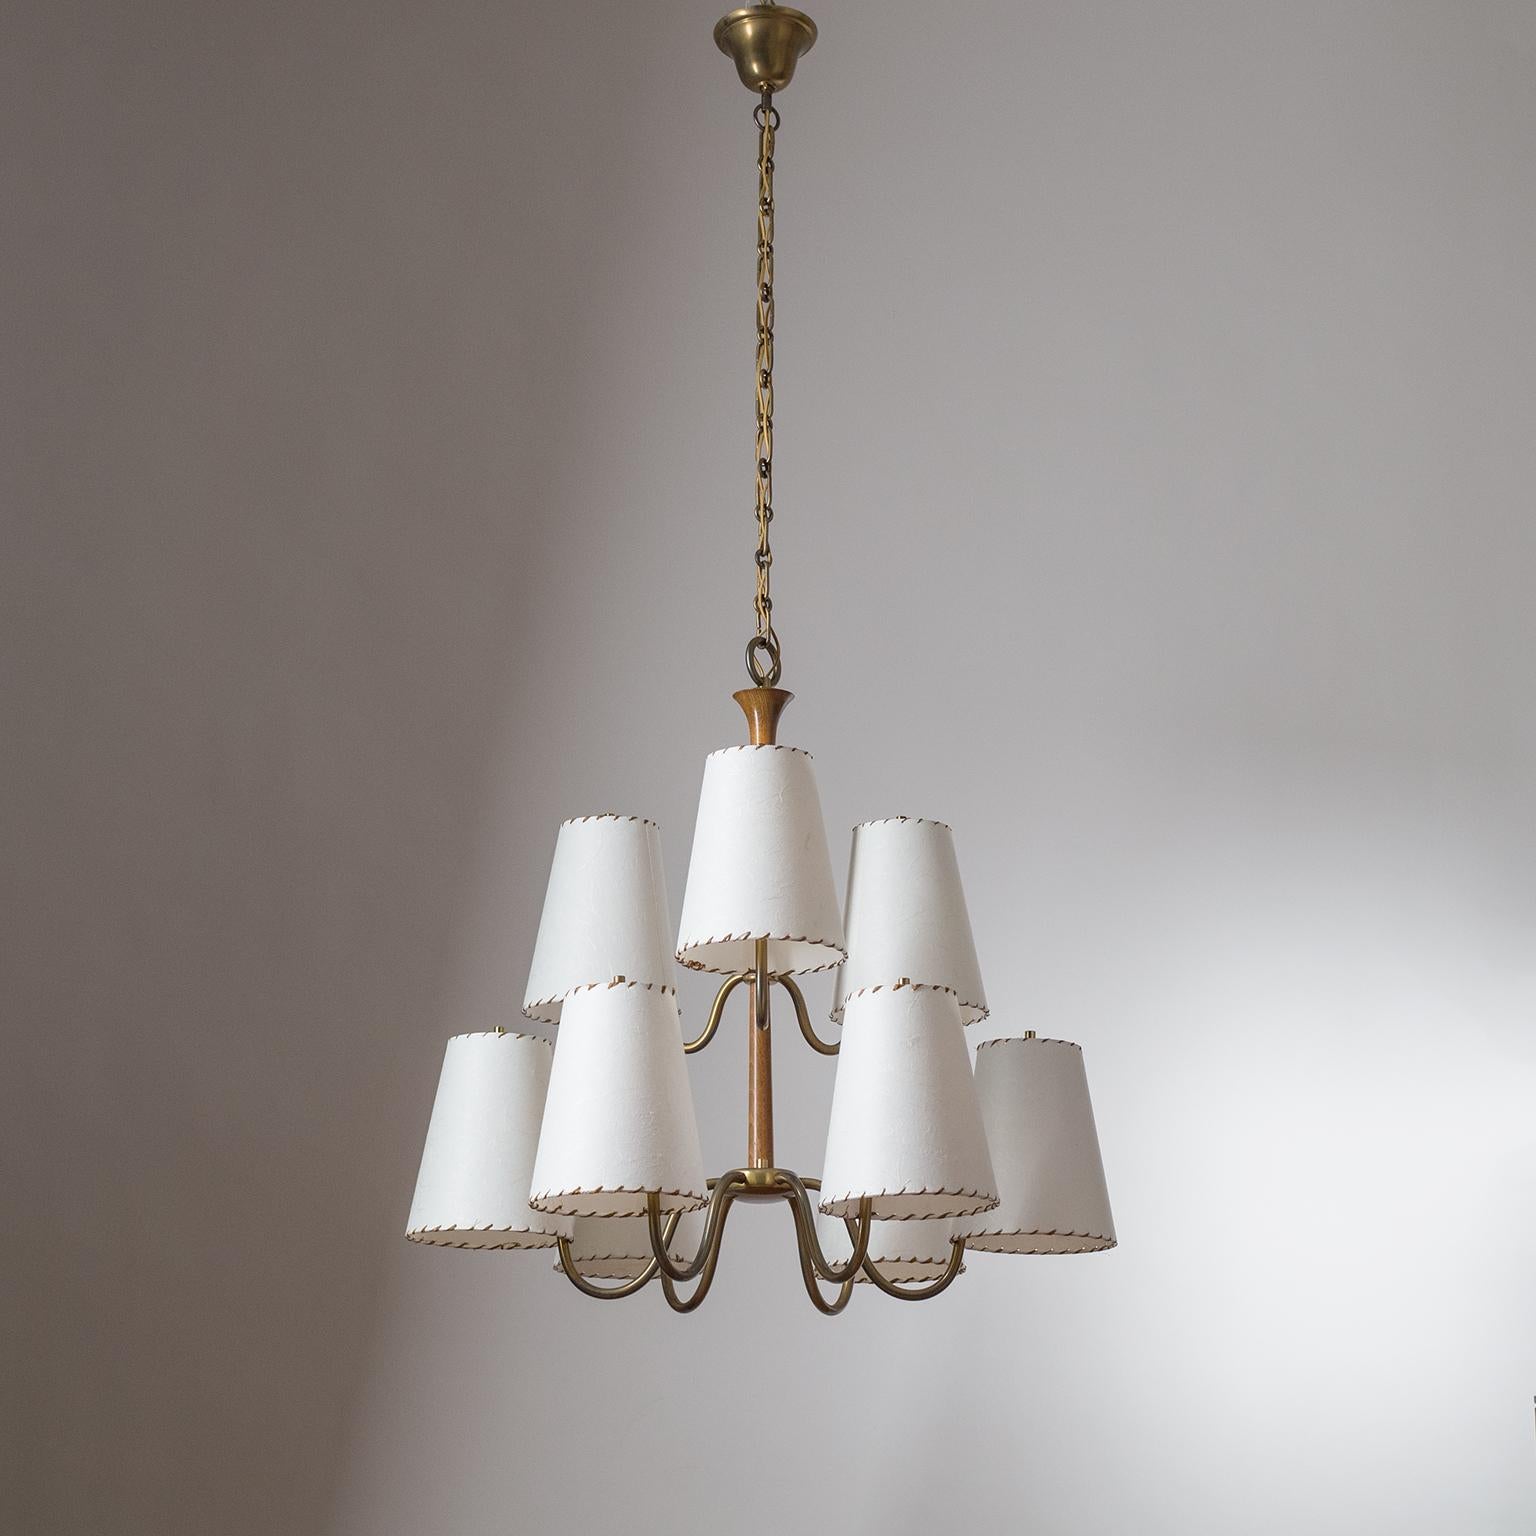 Rare large Austrian nine-arm chandelier from the 1930s, attributed to J.T. Kalmar, featuring brushed brass hardware with a rare stained hardwood stem. Arranged in two tiers are nine large paper shades with raffia 'stiching', each housing an original